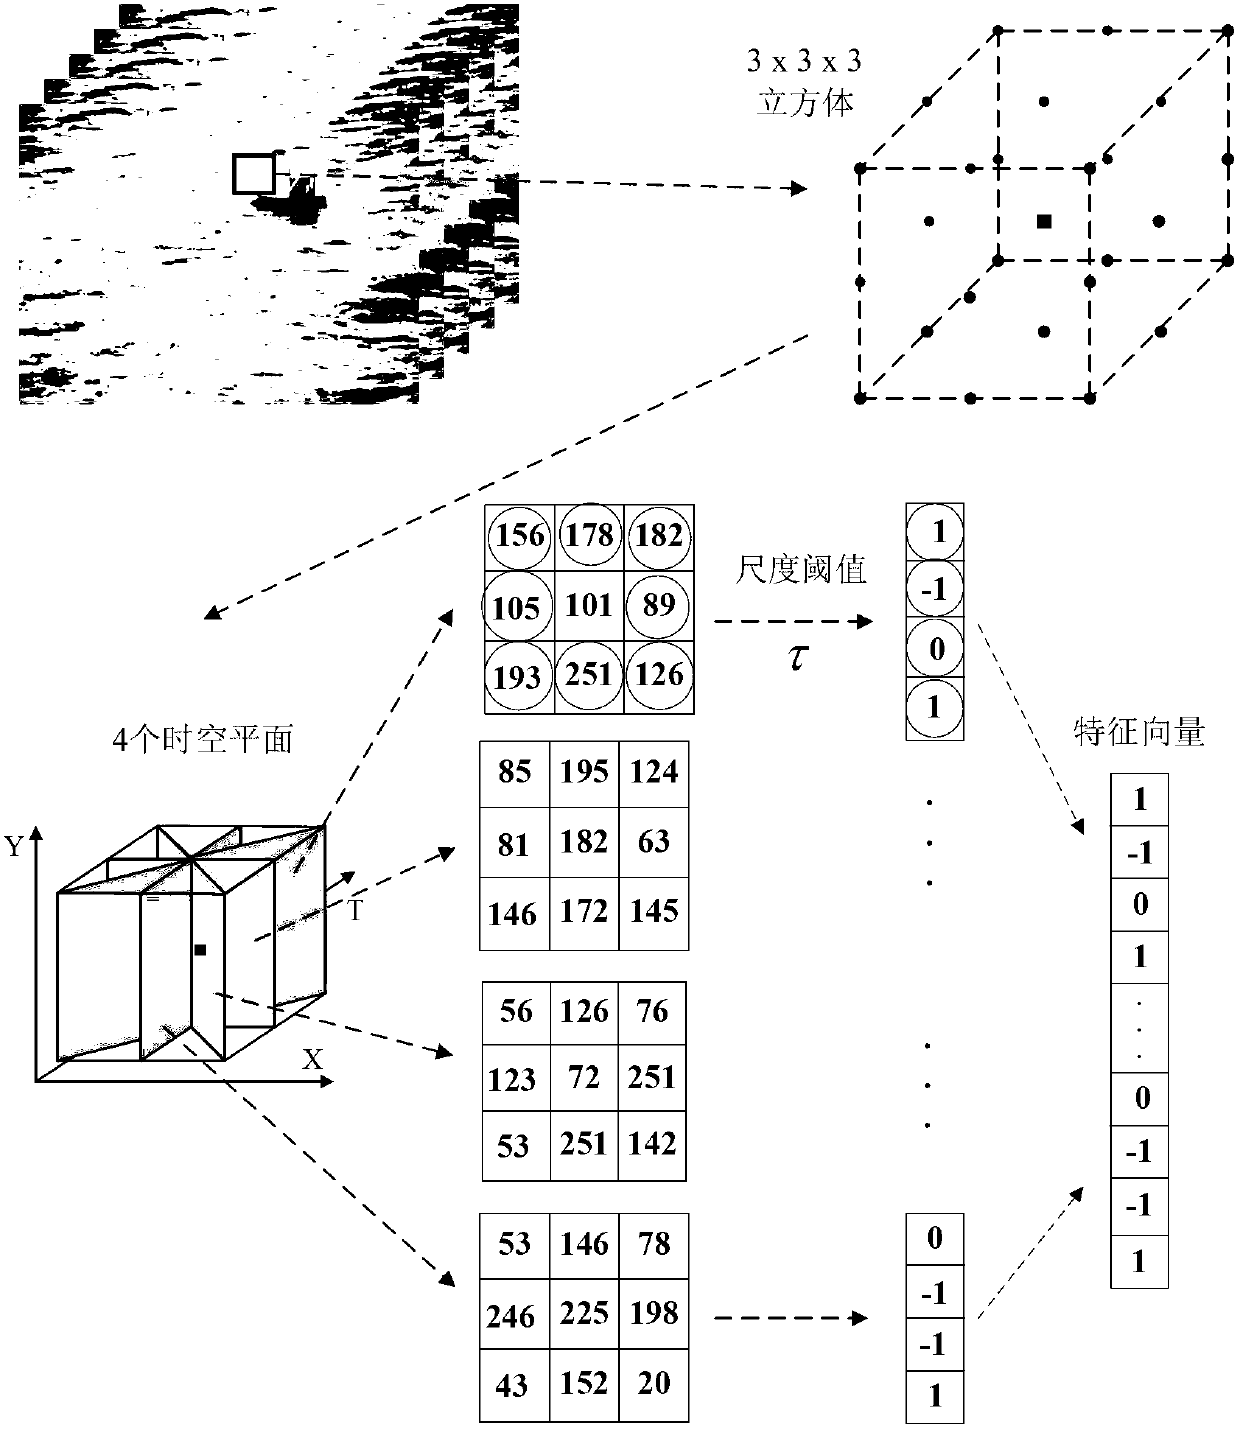 Moving object segmenting method based on local space-time manifold learning